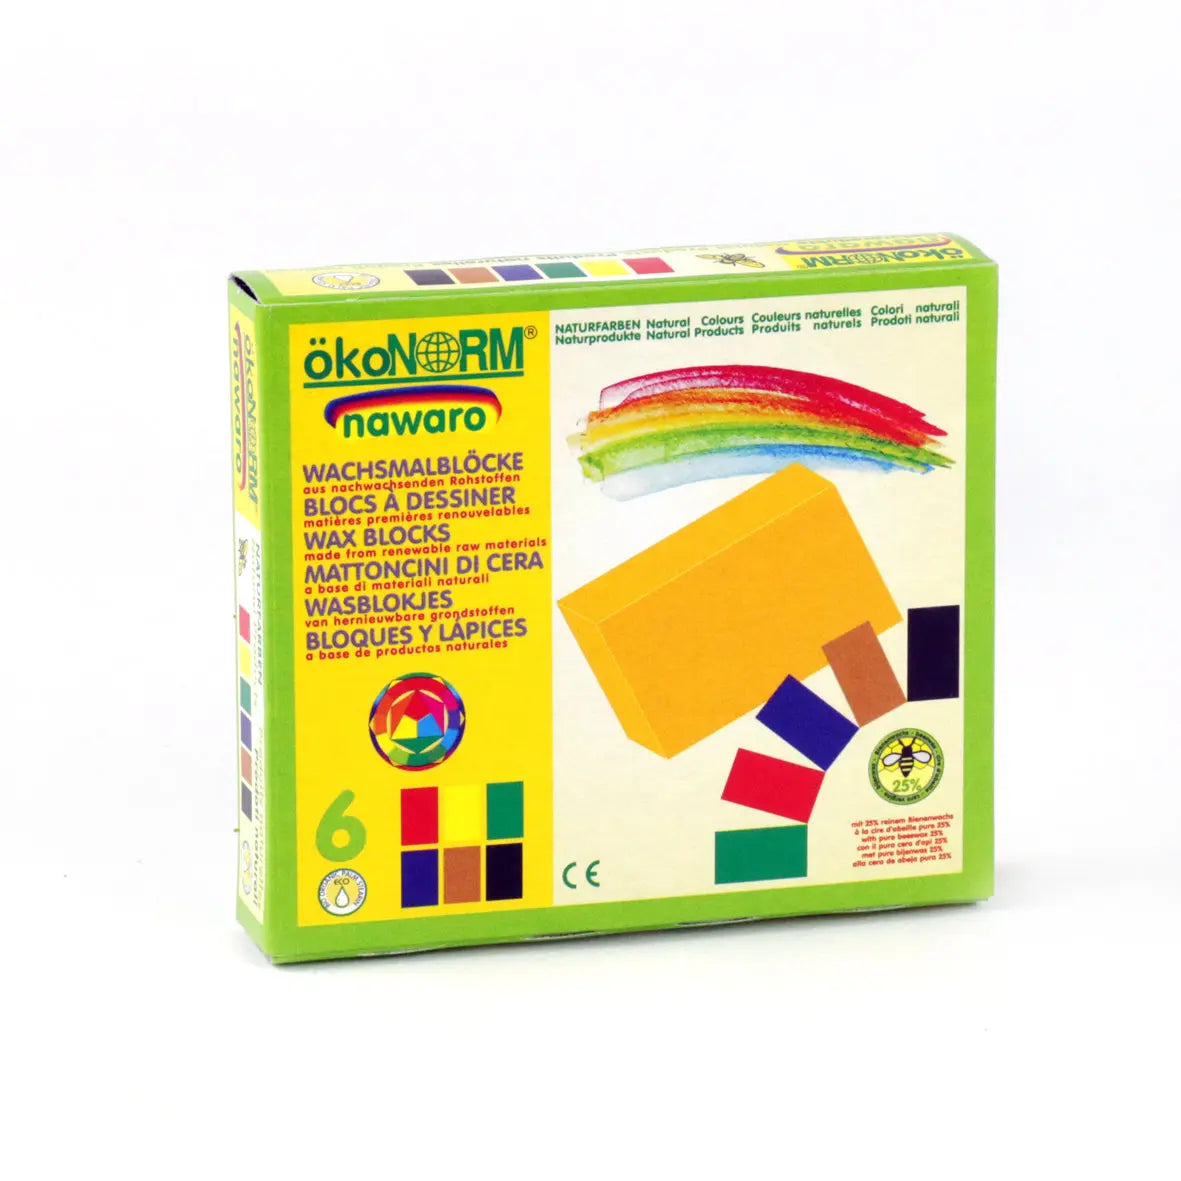 Crayon blocks for toddlers